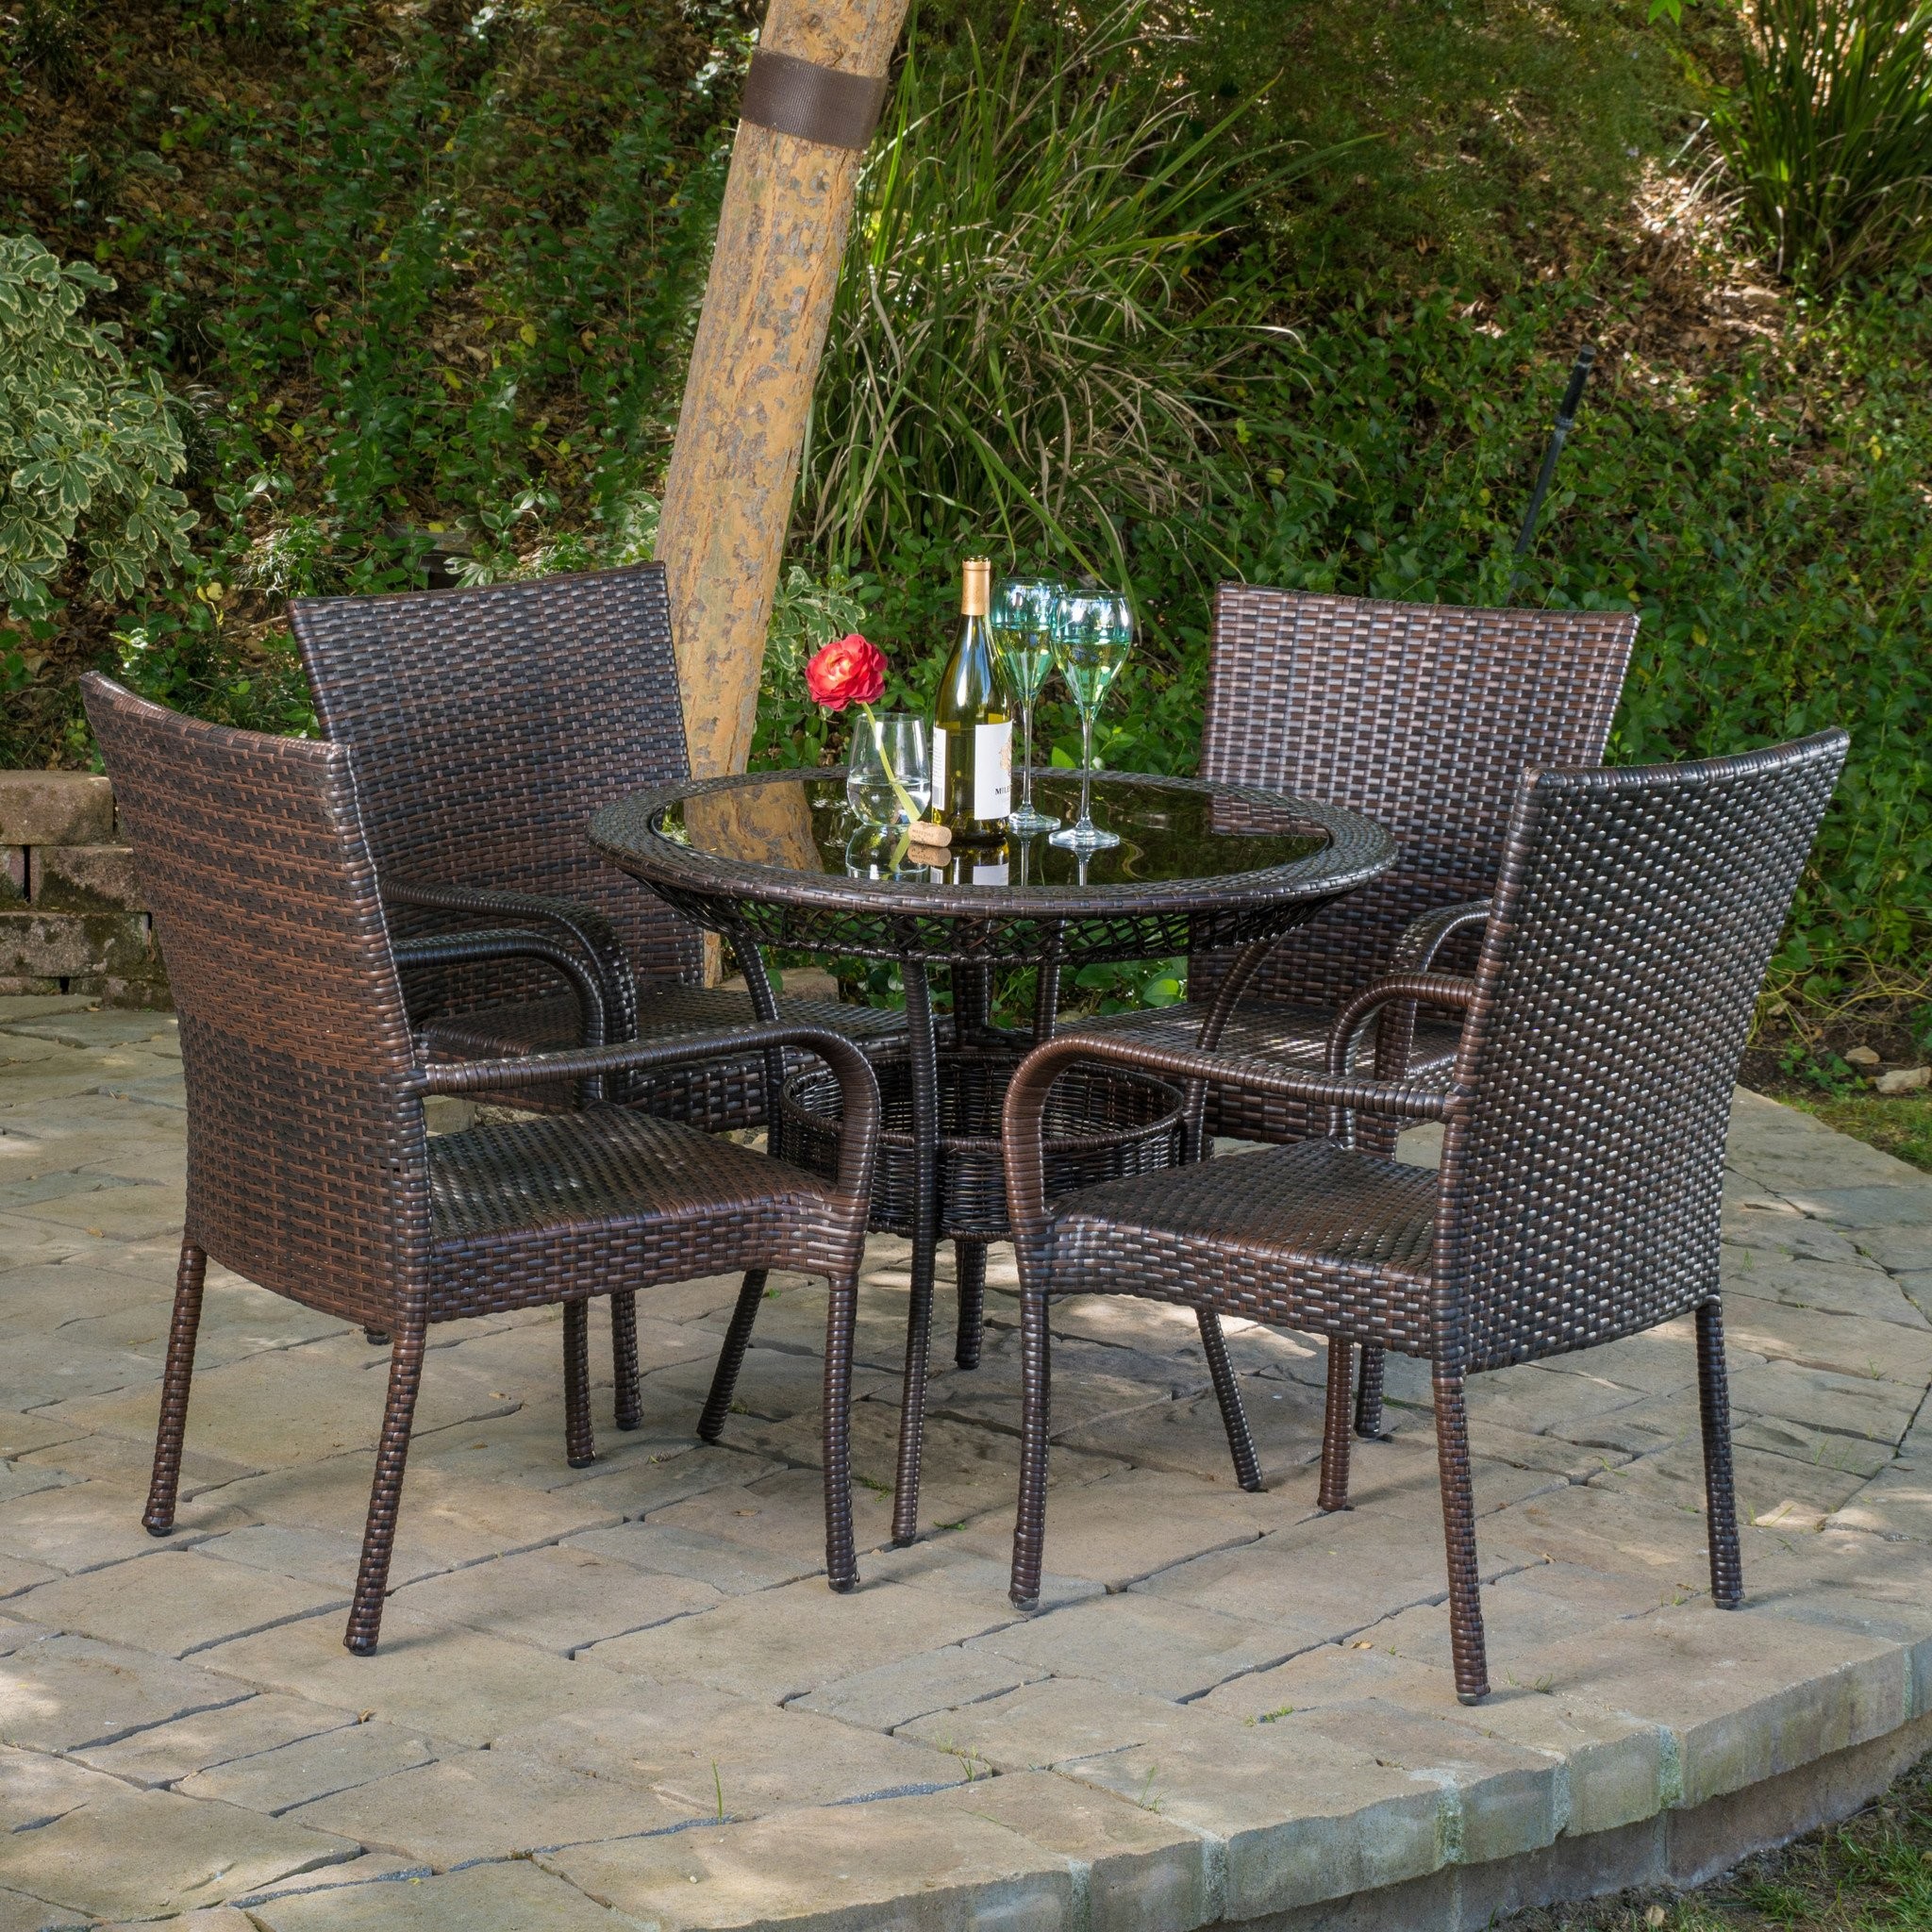 Michael Outdoor Multibrown Wicker  5pc Dining Set